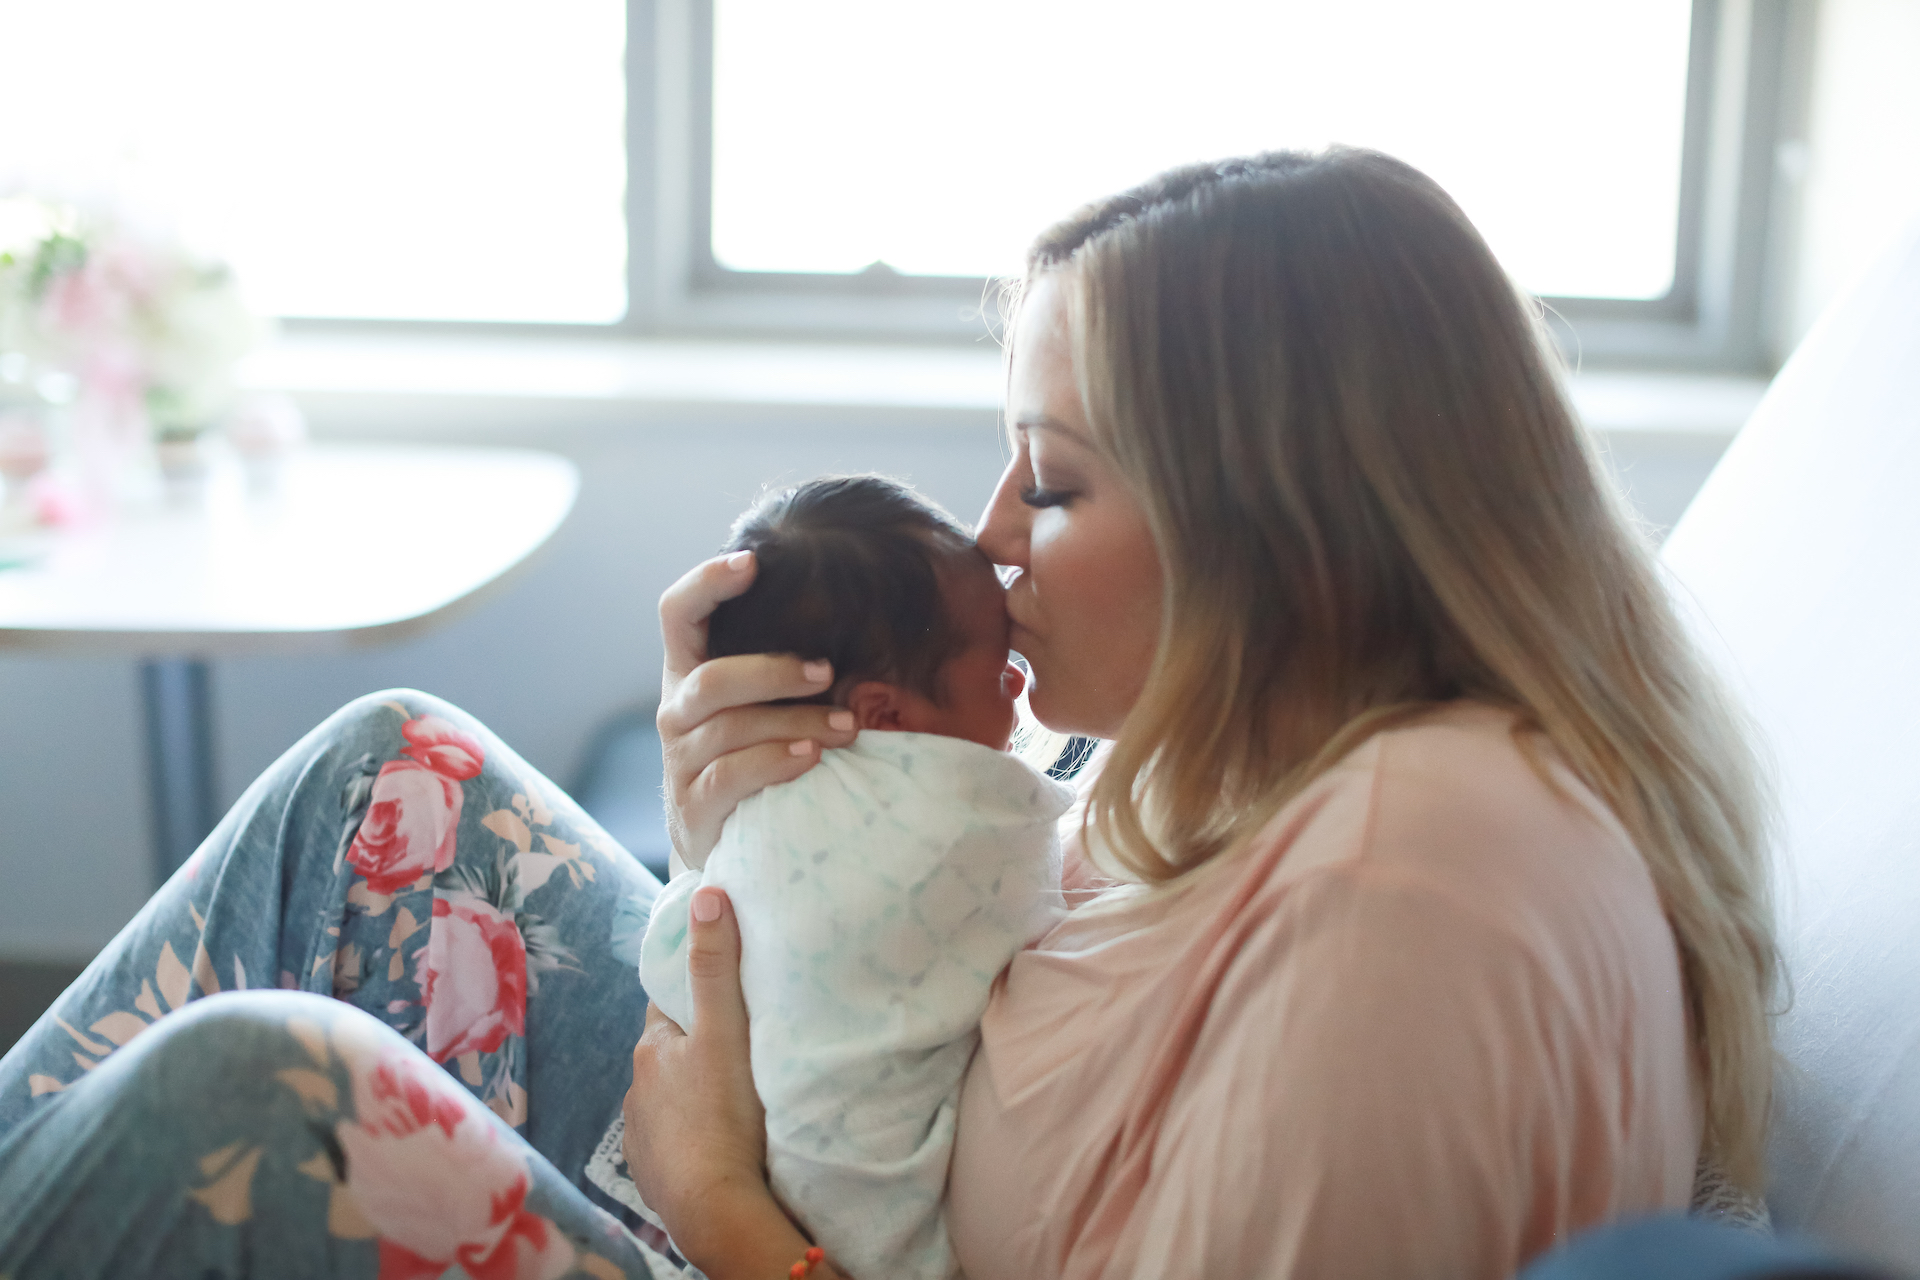 When using donor eggs, will my baby look like me? In this blog, Mother via donor eggs shares her experience overcoming this common fear.